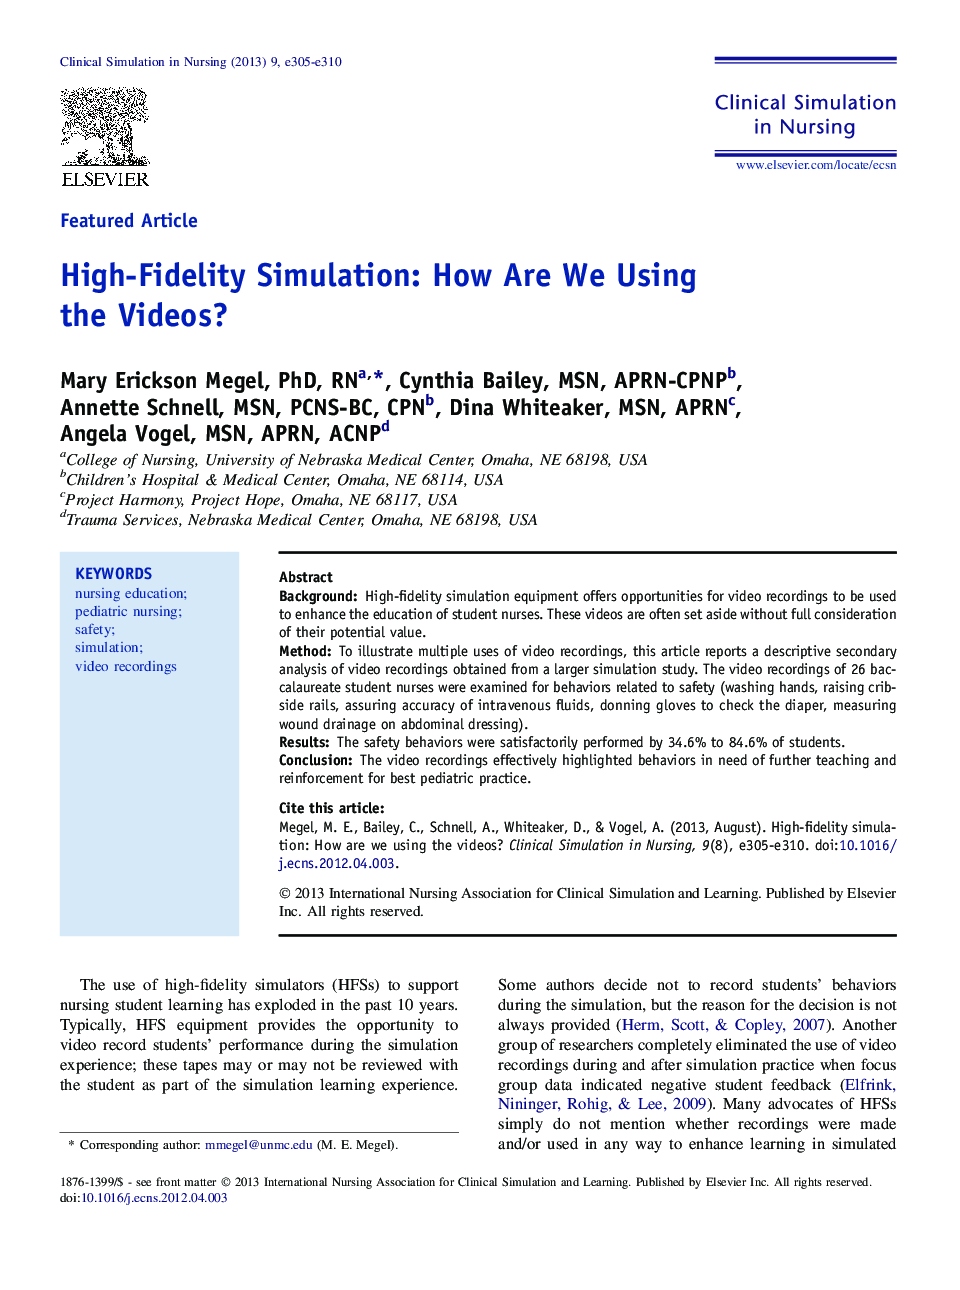 High-Fidelity Simulation: How Are We Using the Videos?